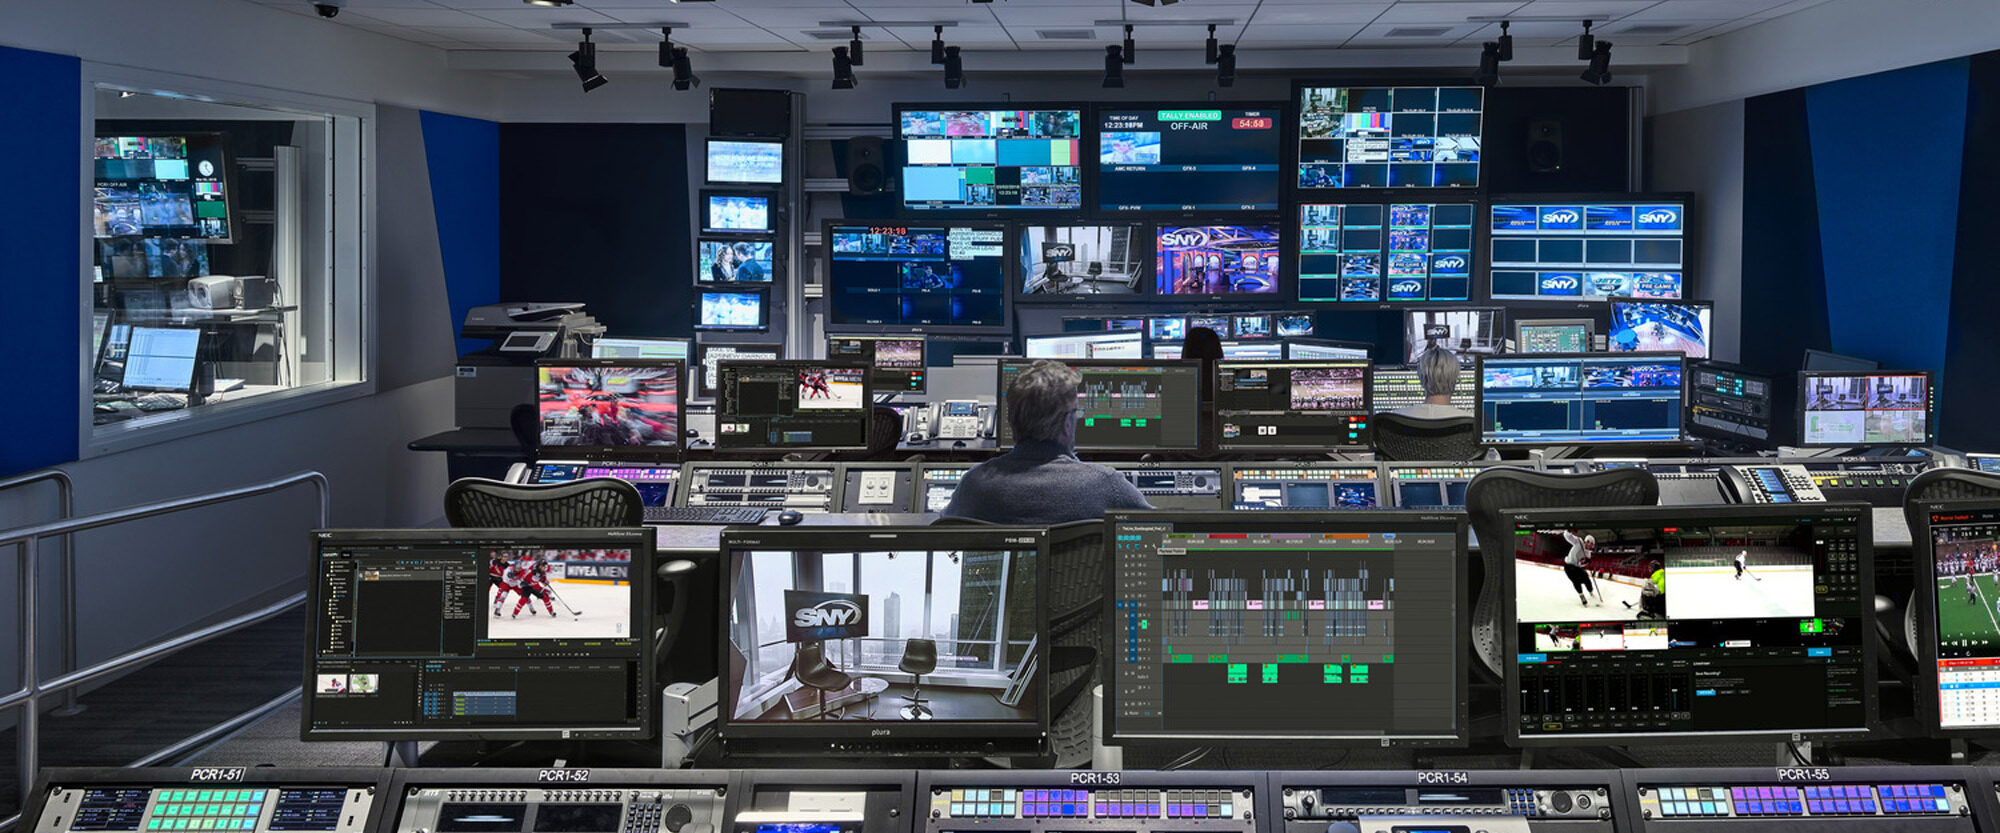 Modern broadcast control room featuring rows of advanced video monitoring equipment, multiple screens displaying various channels, and an operator focused on adjusting technical settings. The space is organized, reflecting a high-tech and efficient design with ergonomic seating and task lighting.